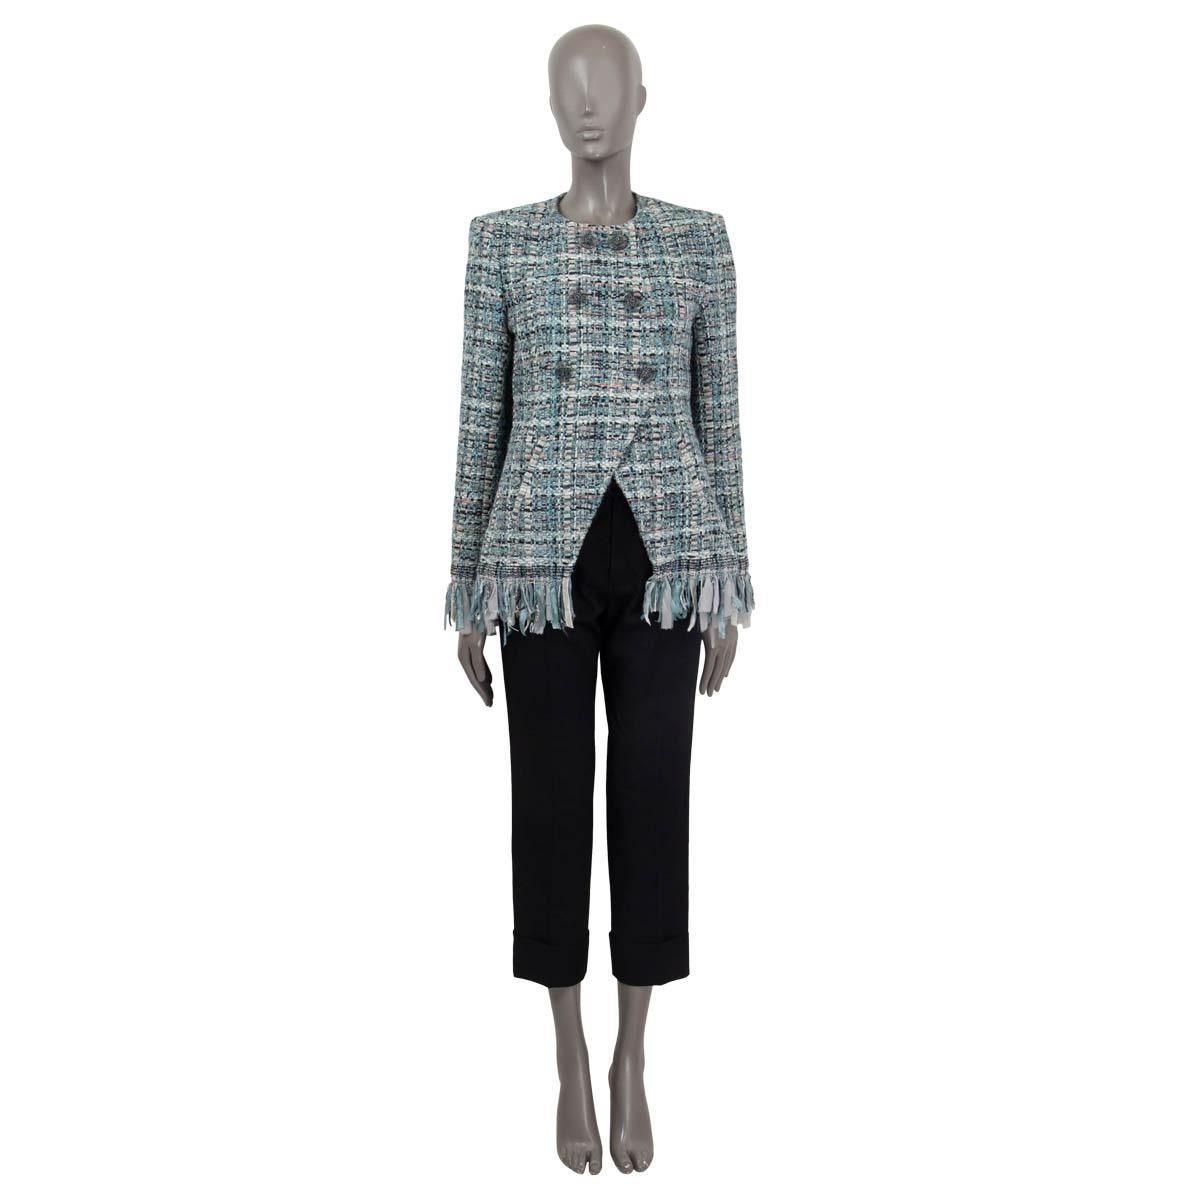 100% authentic Chanel Cosmopolite double breasted boucle blazer in light blue, turquoise, navy, blue, pink, off white and gray cotton (43%), nylon (24%), wool (13%), polyester (13%), acrylic (3%), linen (2%) and alpaca (2%). Features padded